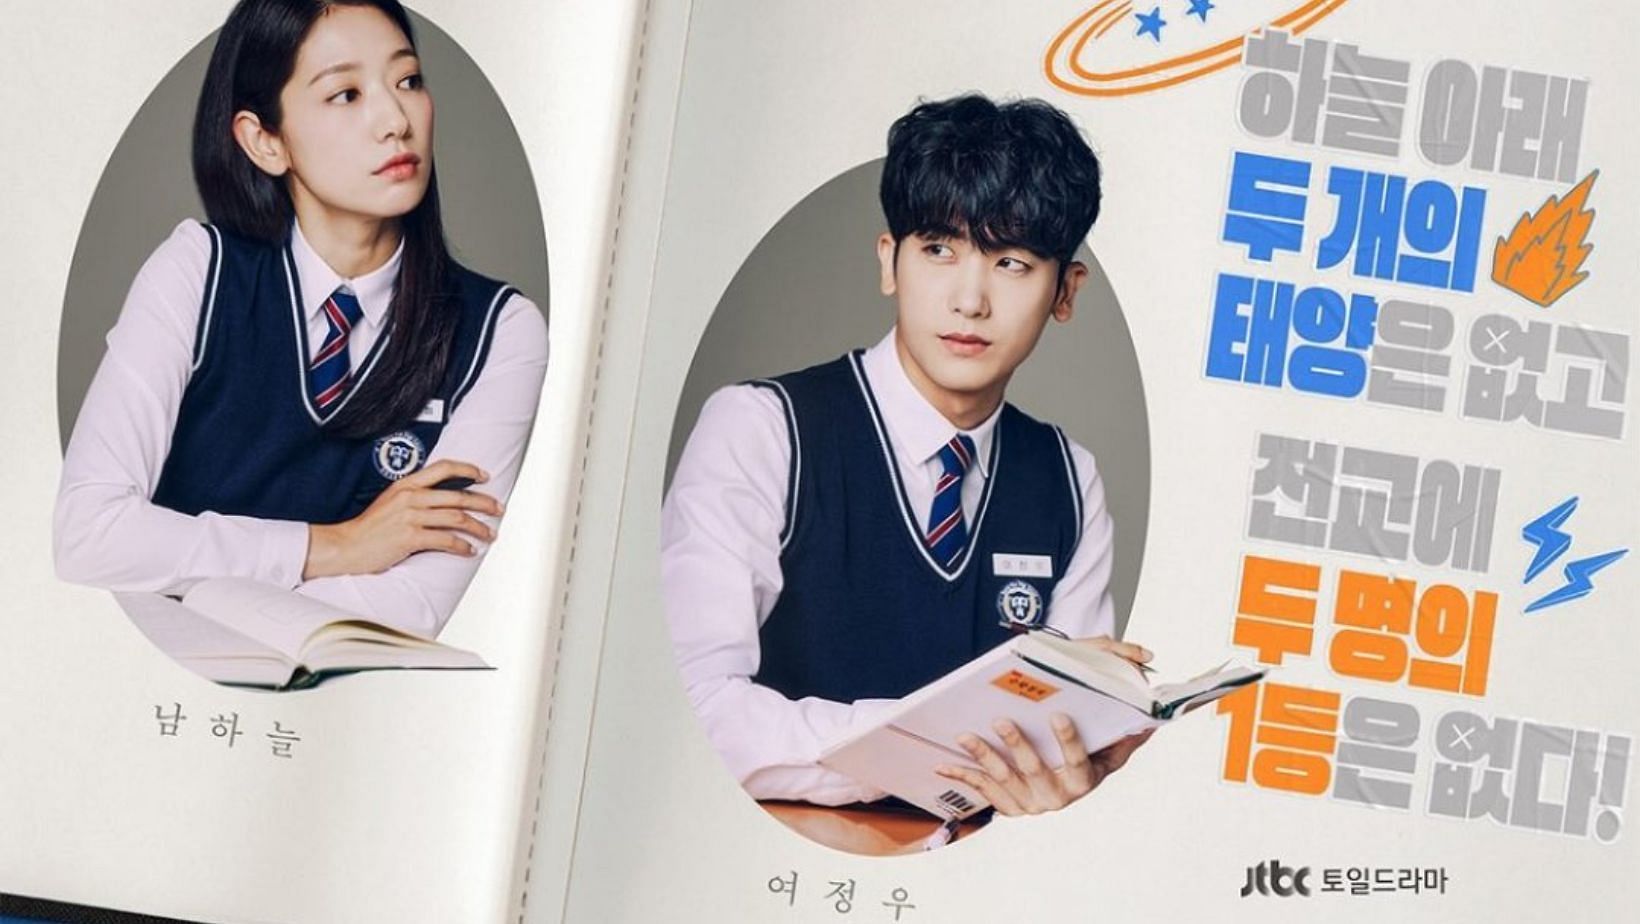 Park Hyung-Sik and Shin-Hye starring K-drama &lsquo;Doctor Slump&rsquo; release new teaser poster. (Image via X/@kimyoungdaes)